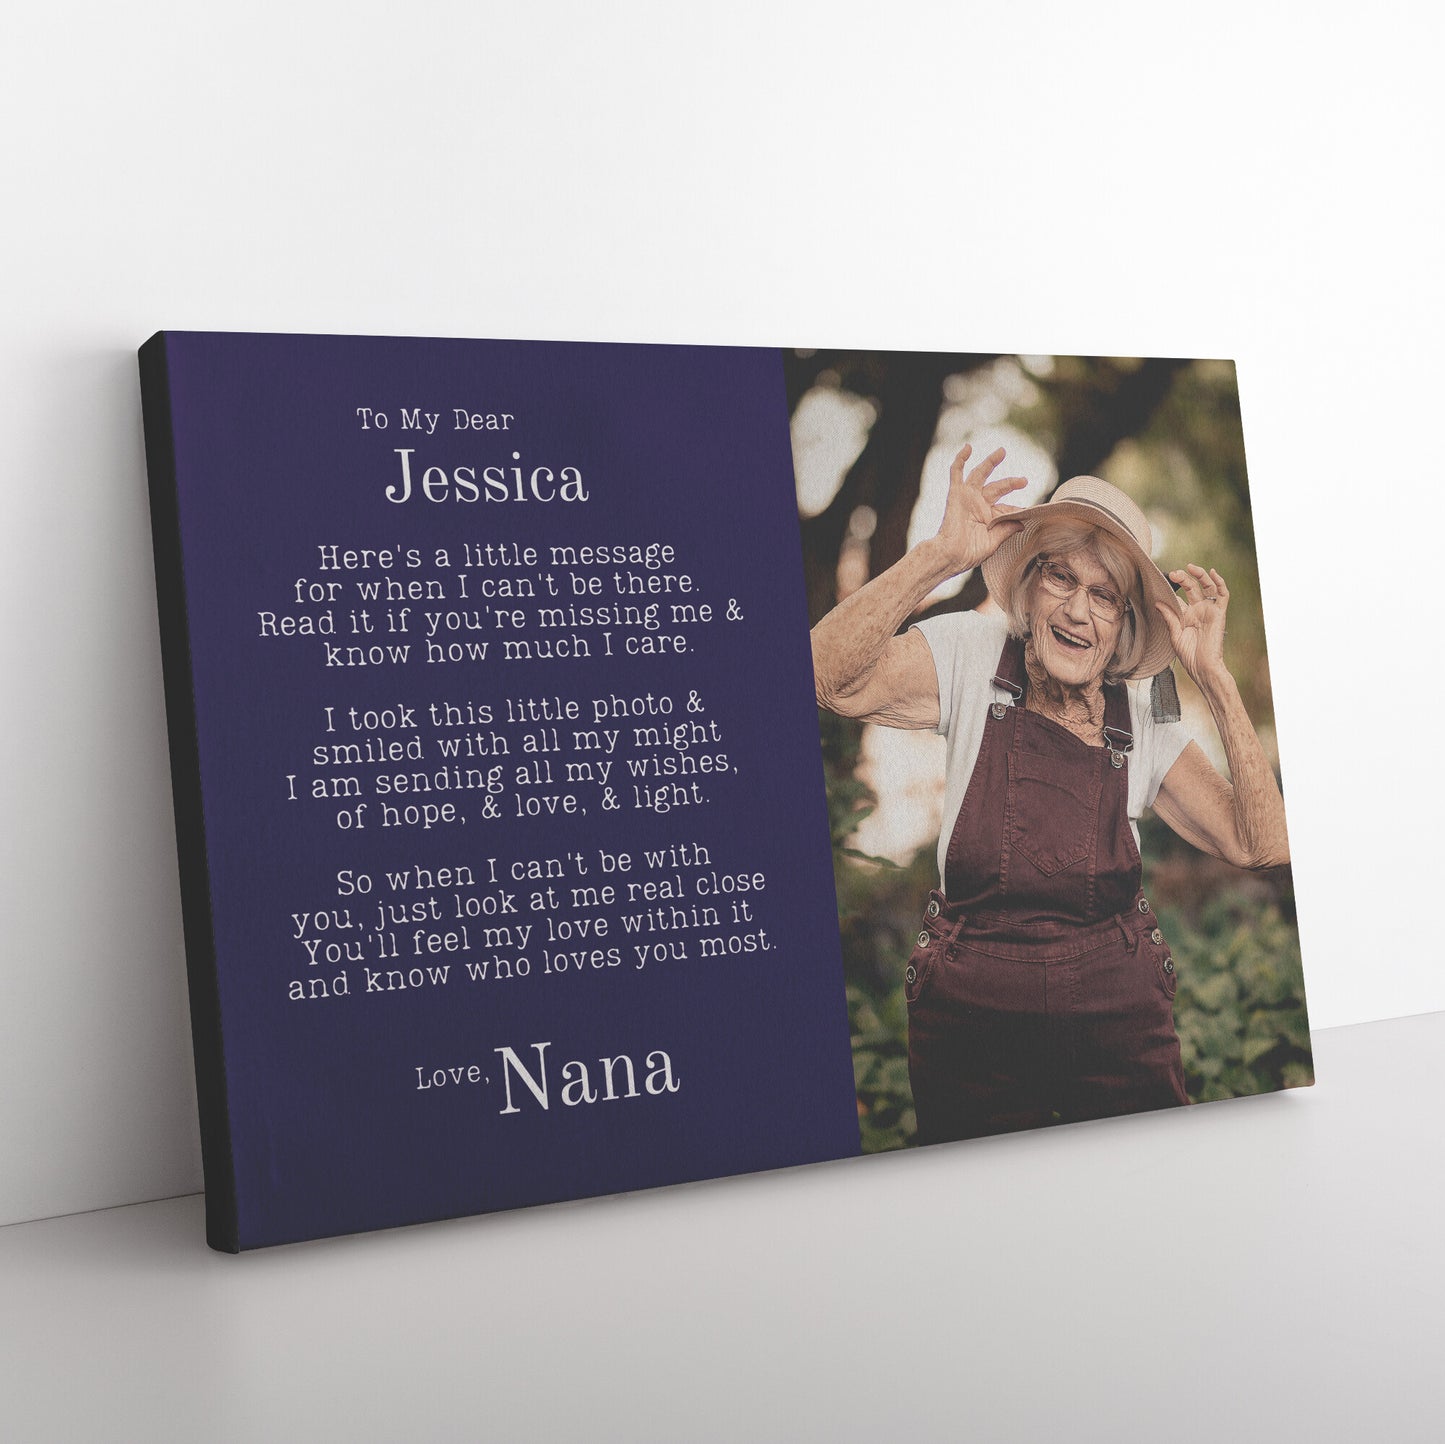 Personalized Photo Upload Grandmother/Granddaughter Canvas Wall Art